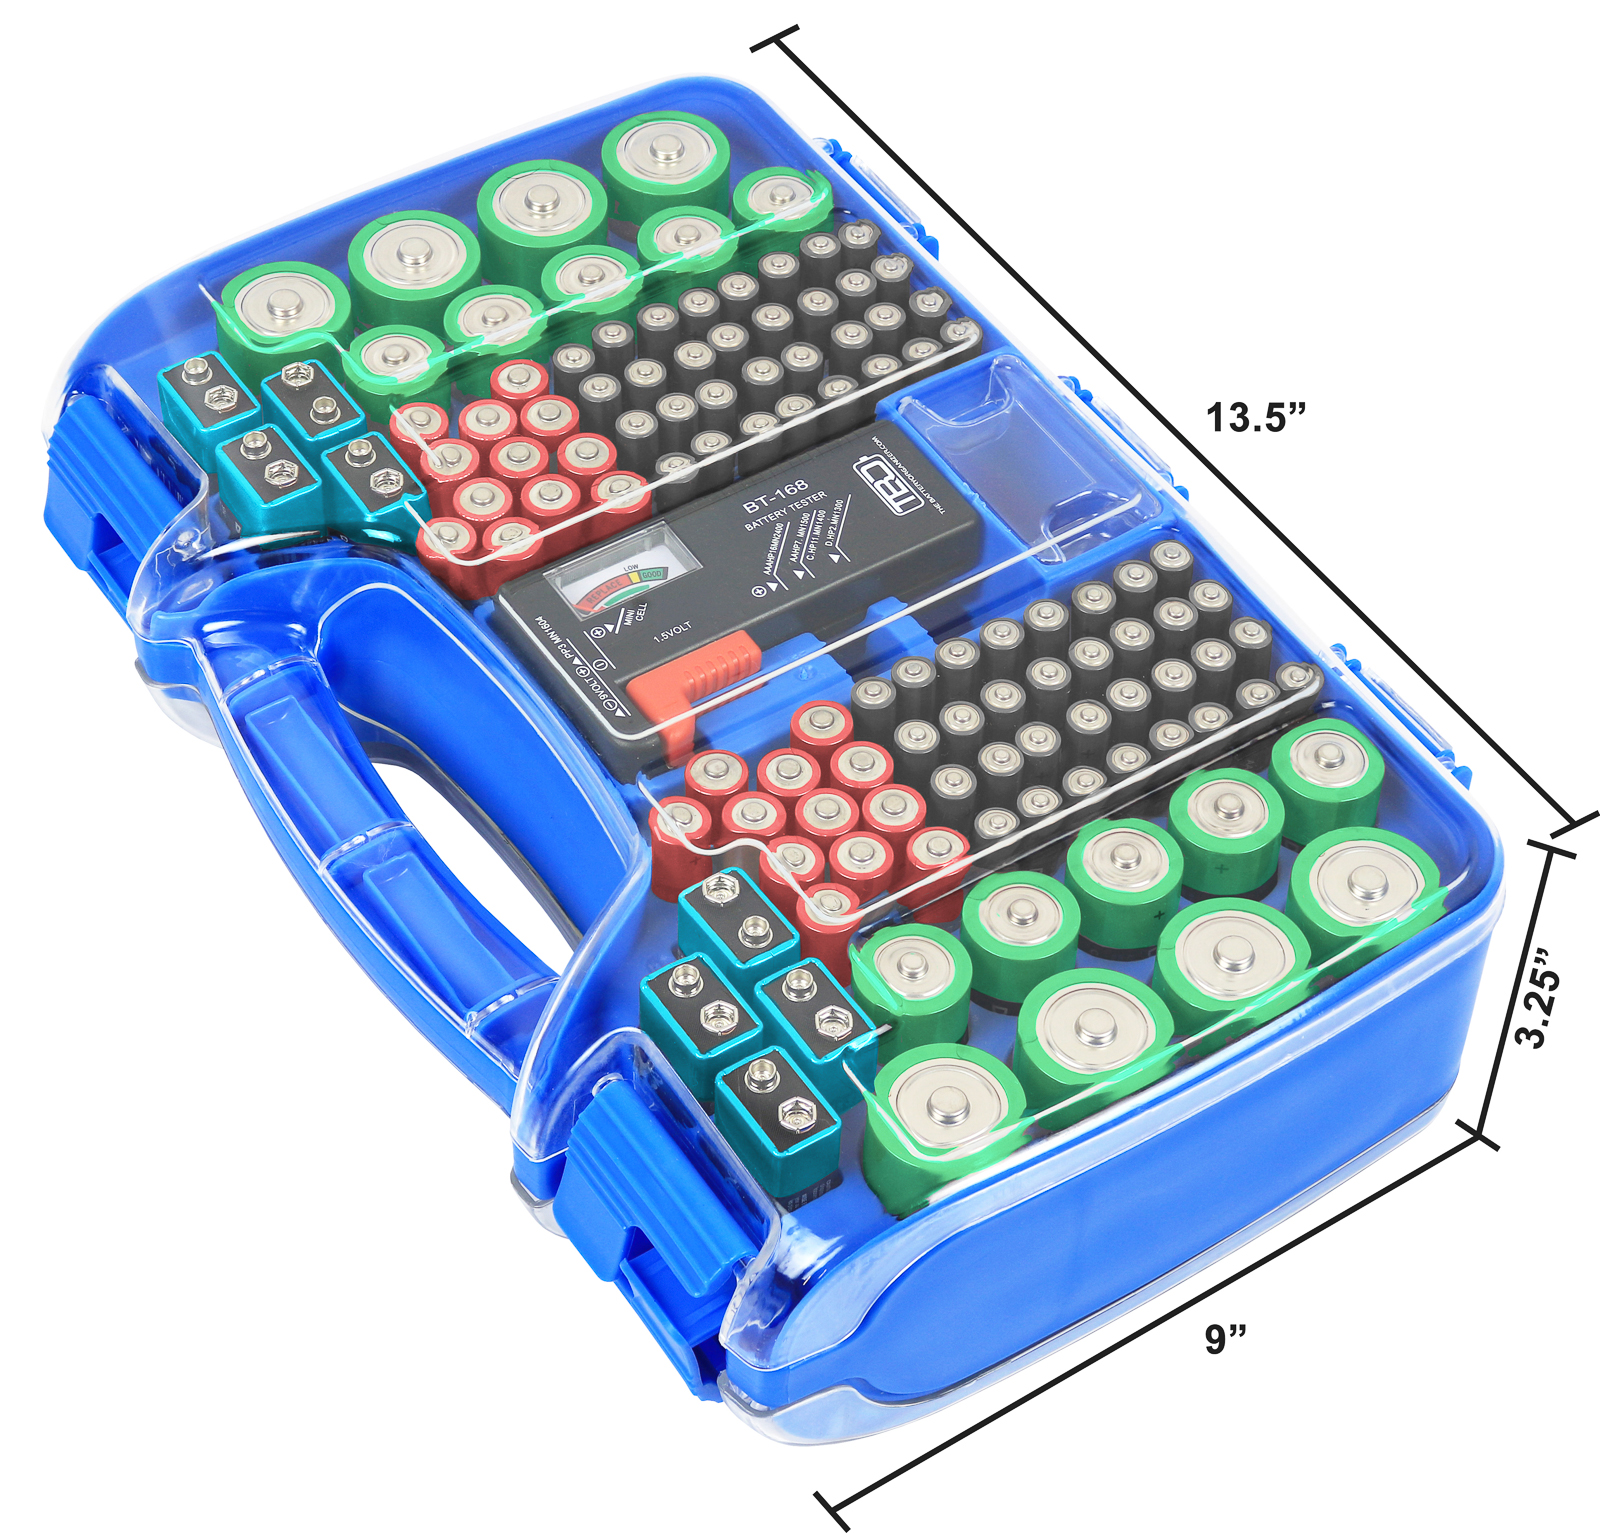 The Battery Organizer Battery Storage Case with Hinged Clear Cover, Includes a Removable Battery Tester, Holds 180 Batteries Various Sizes Blue. - image 3 of 7